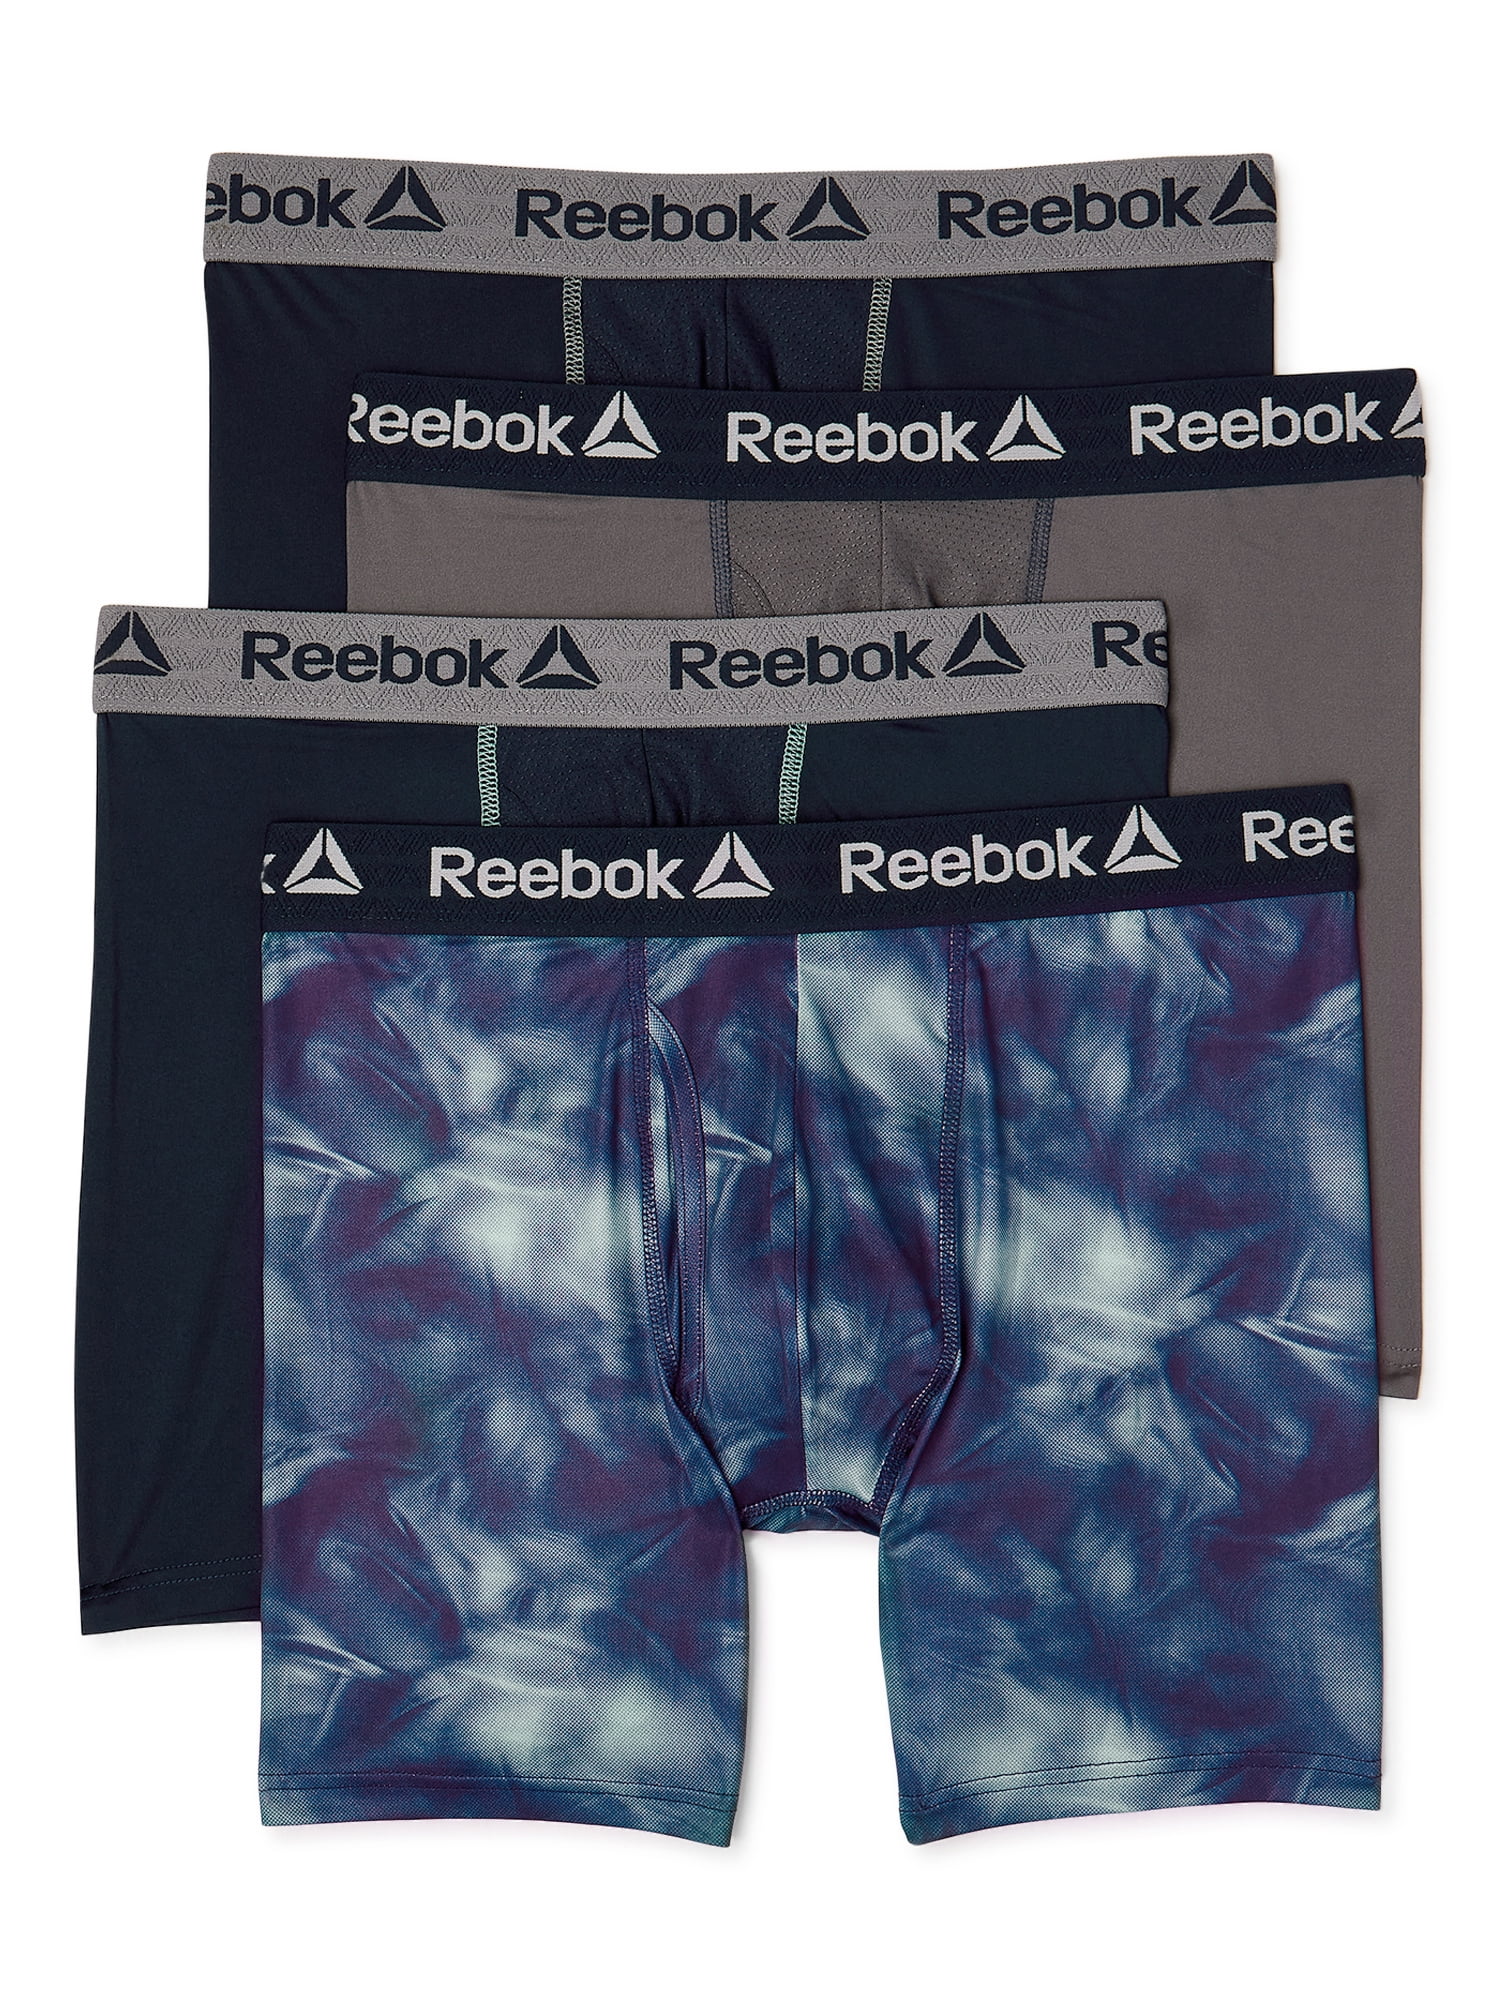 Reebok Men's 4 Pack Performance Boxer Brief, Multi-Color, Size M, NEW -  clothing & accessories - by owner - apparel